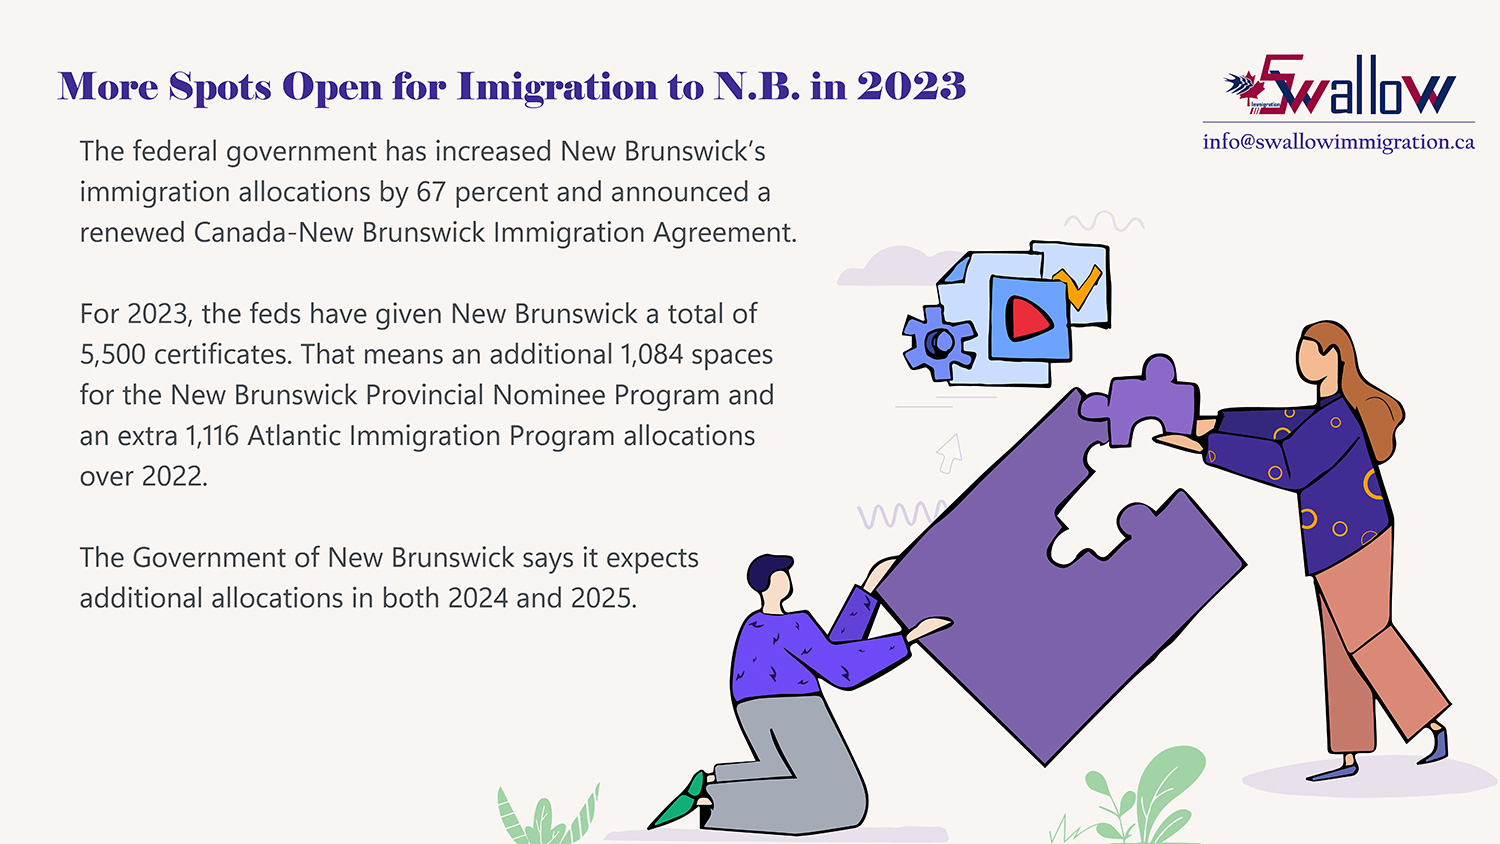 More Spots Open for Imigration to N.B. in 2023